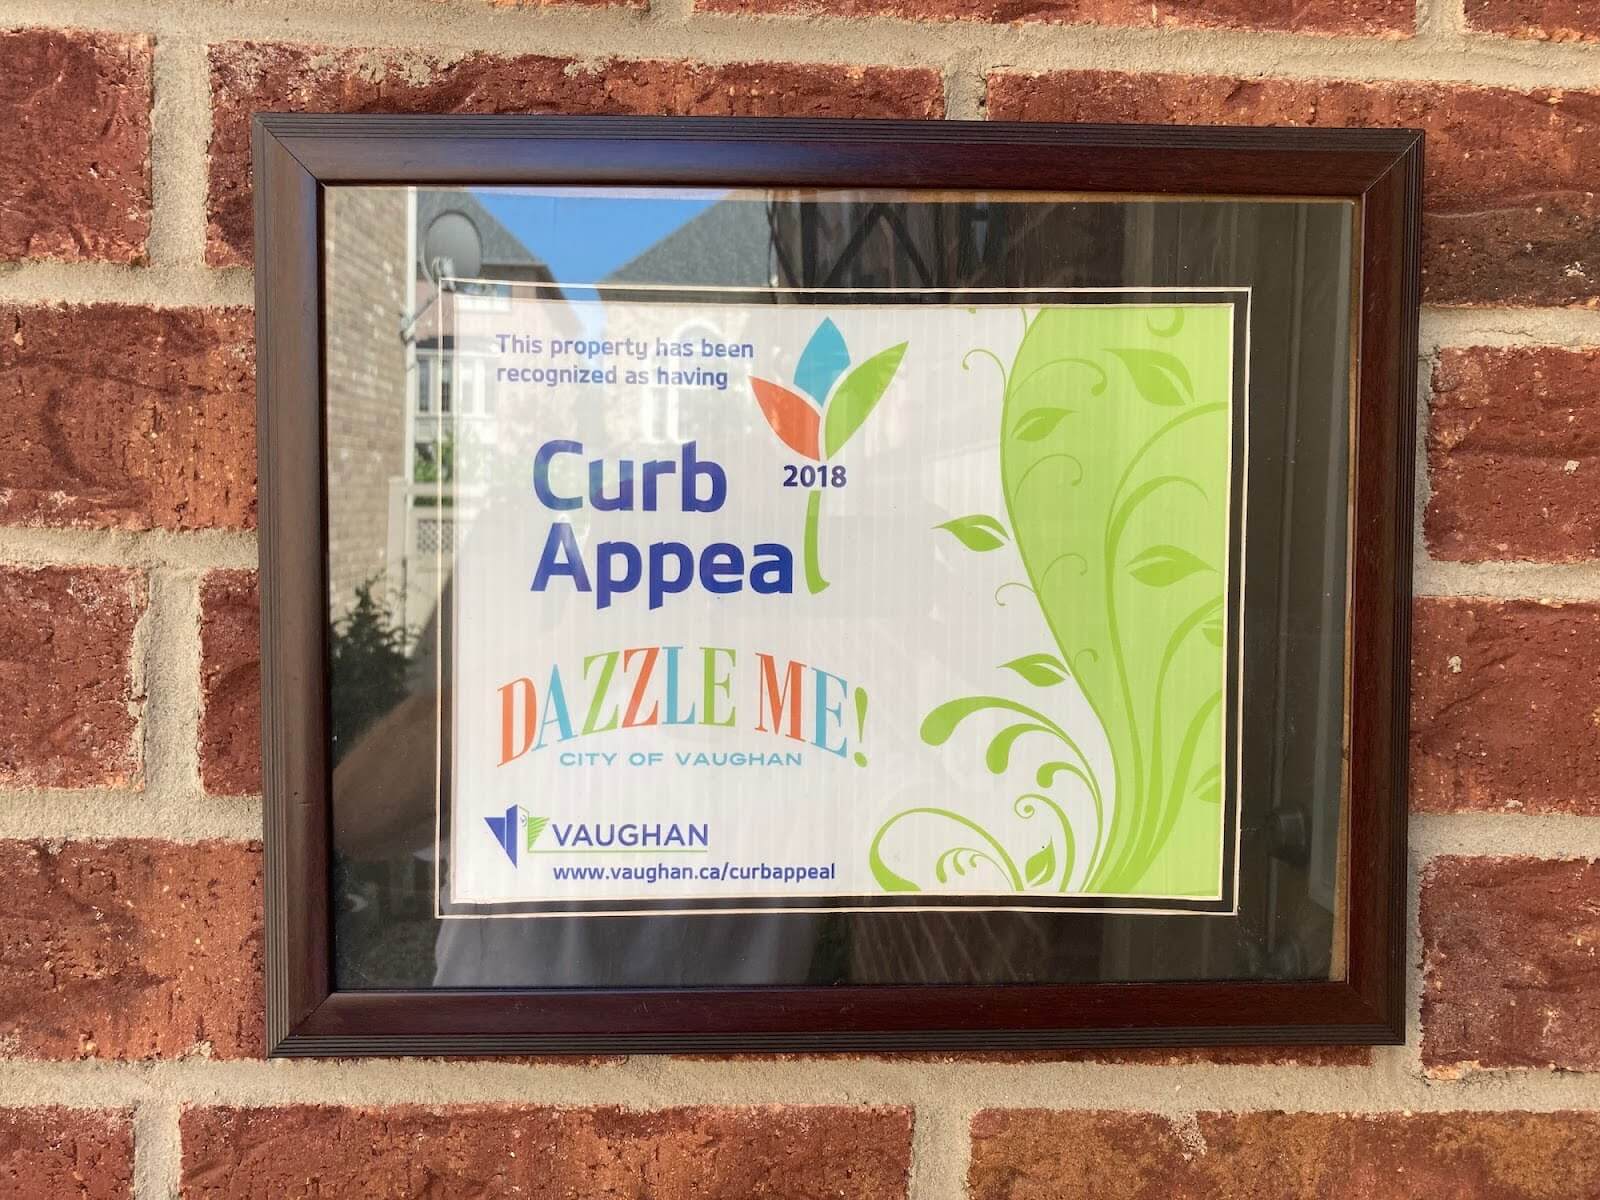 Curb Appeal Certificate to LawnMart.